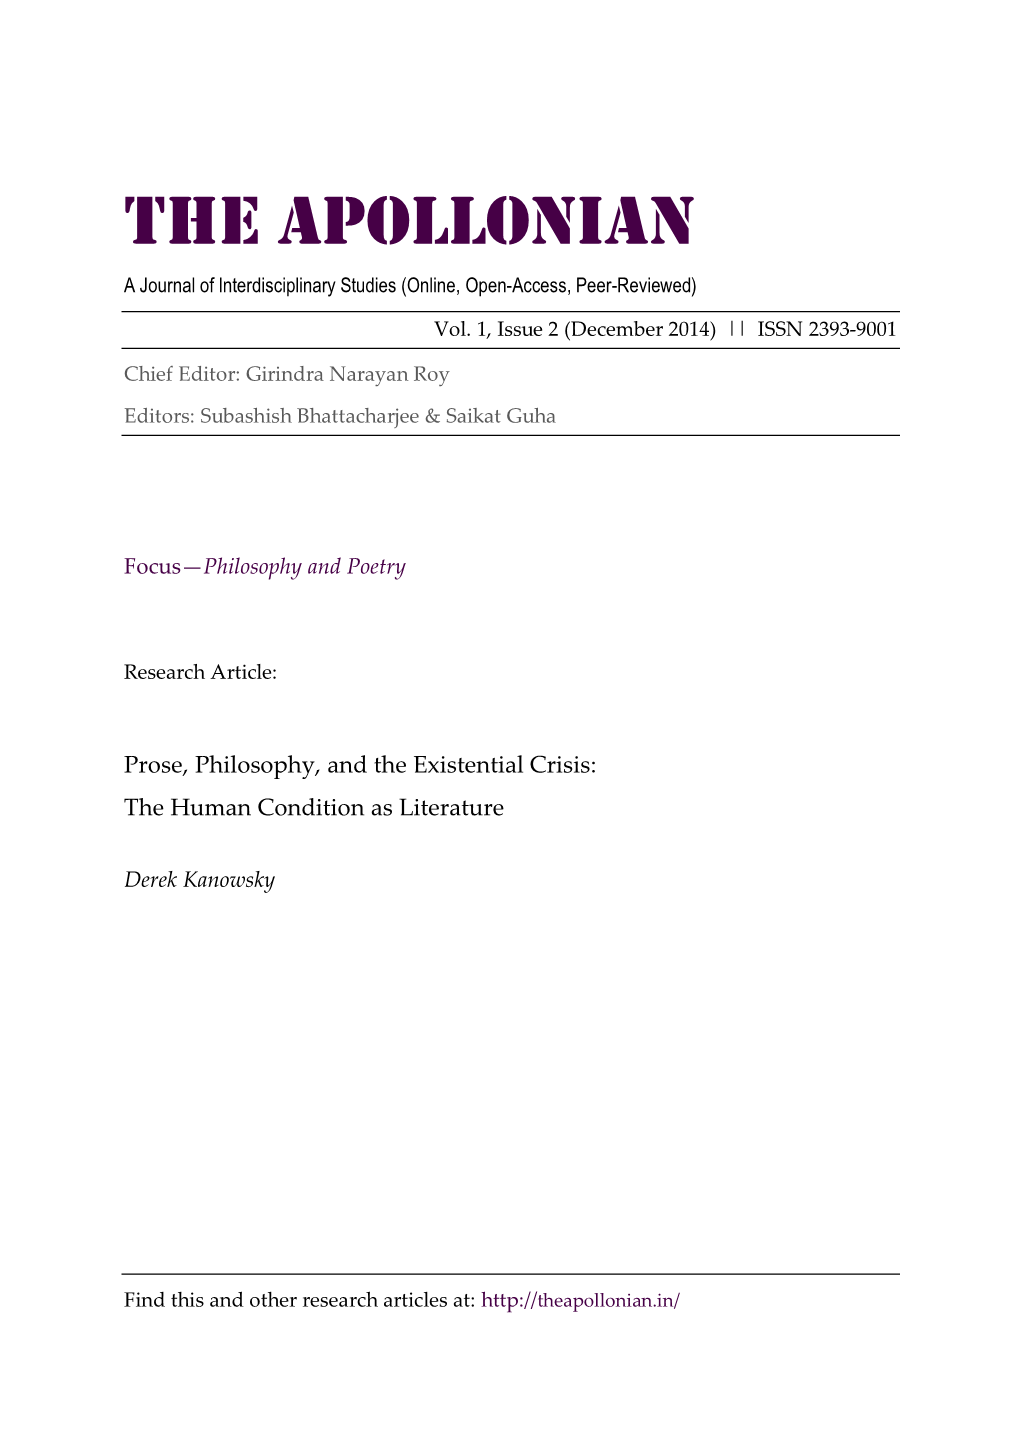 THE APOLLONIAN a Journal of Interdisciplinary Studies (Online, Open-Access, Peer-Reviewed)